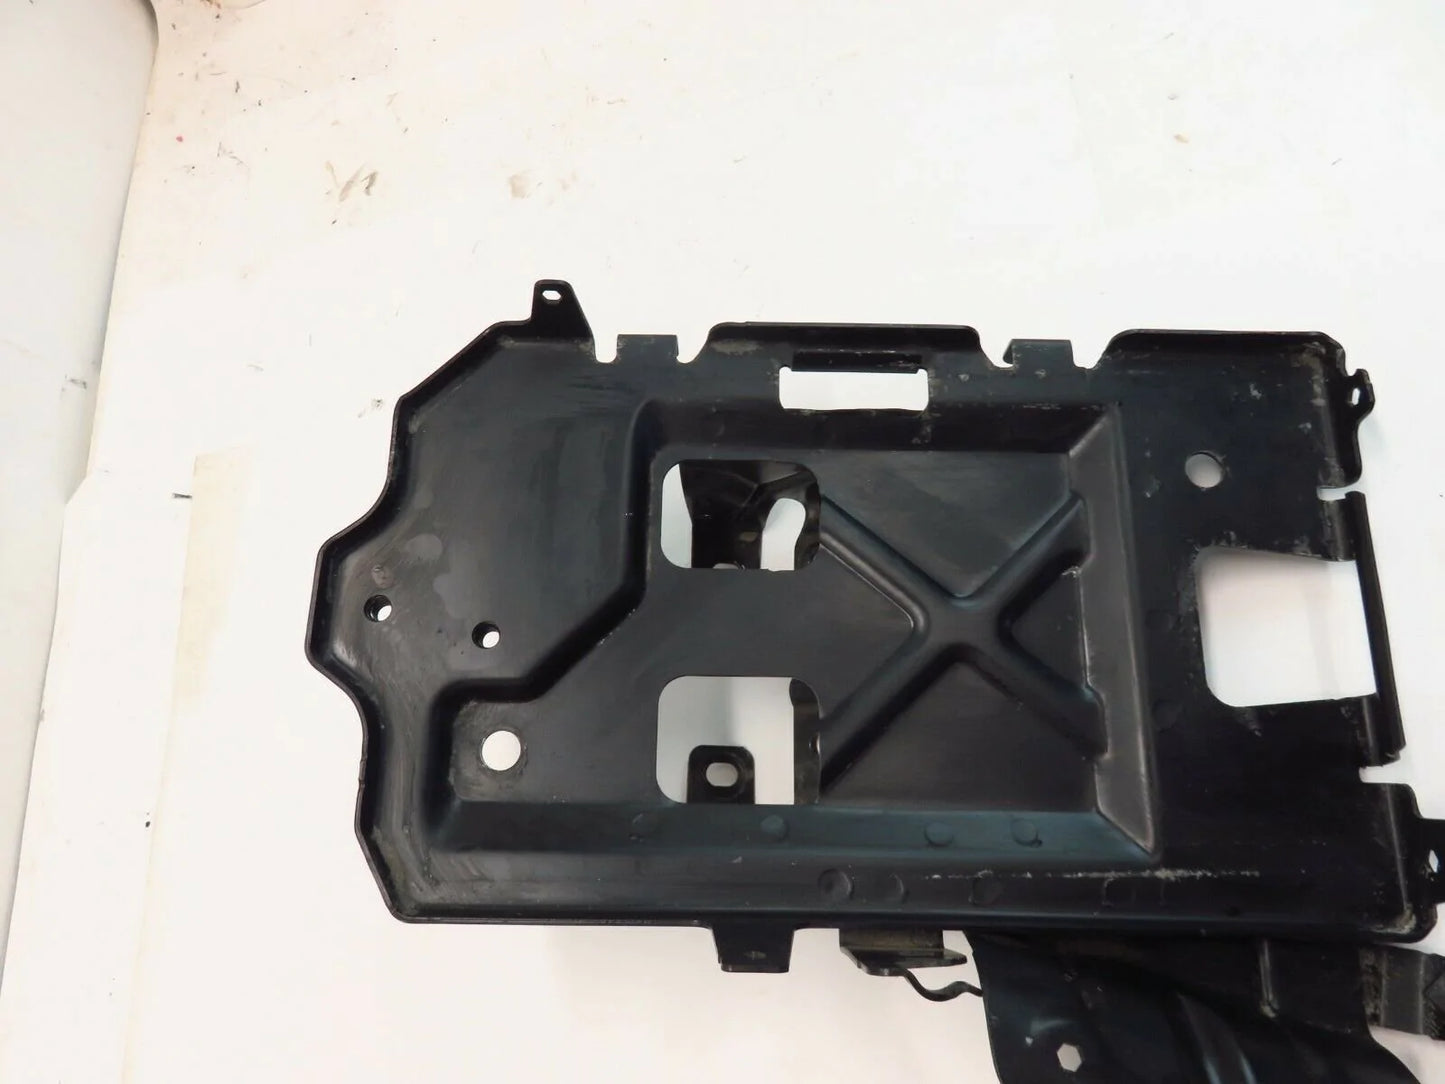 2018-2020 Buick Regal TourX Battery Tray Holder Bracket Support 84221669 18-20